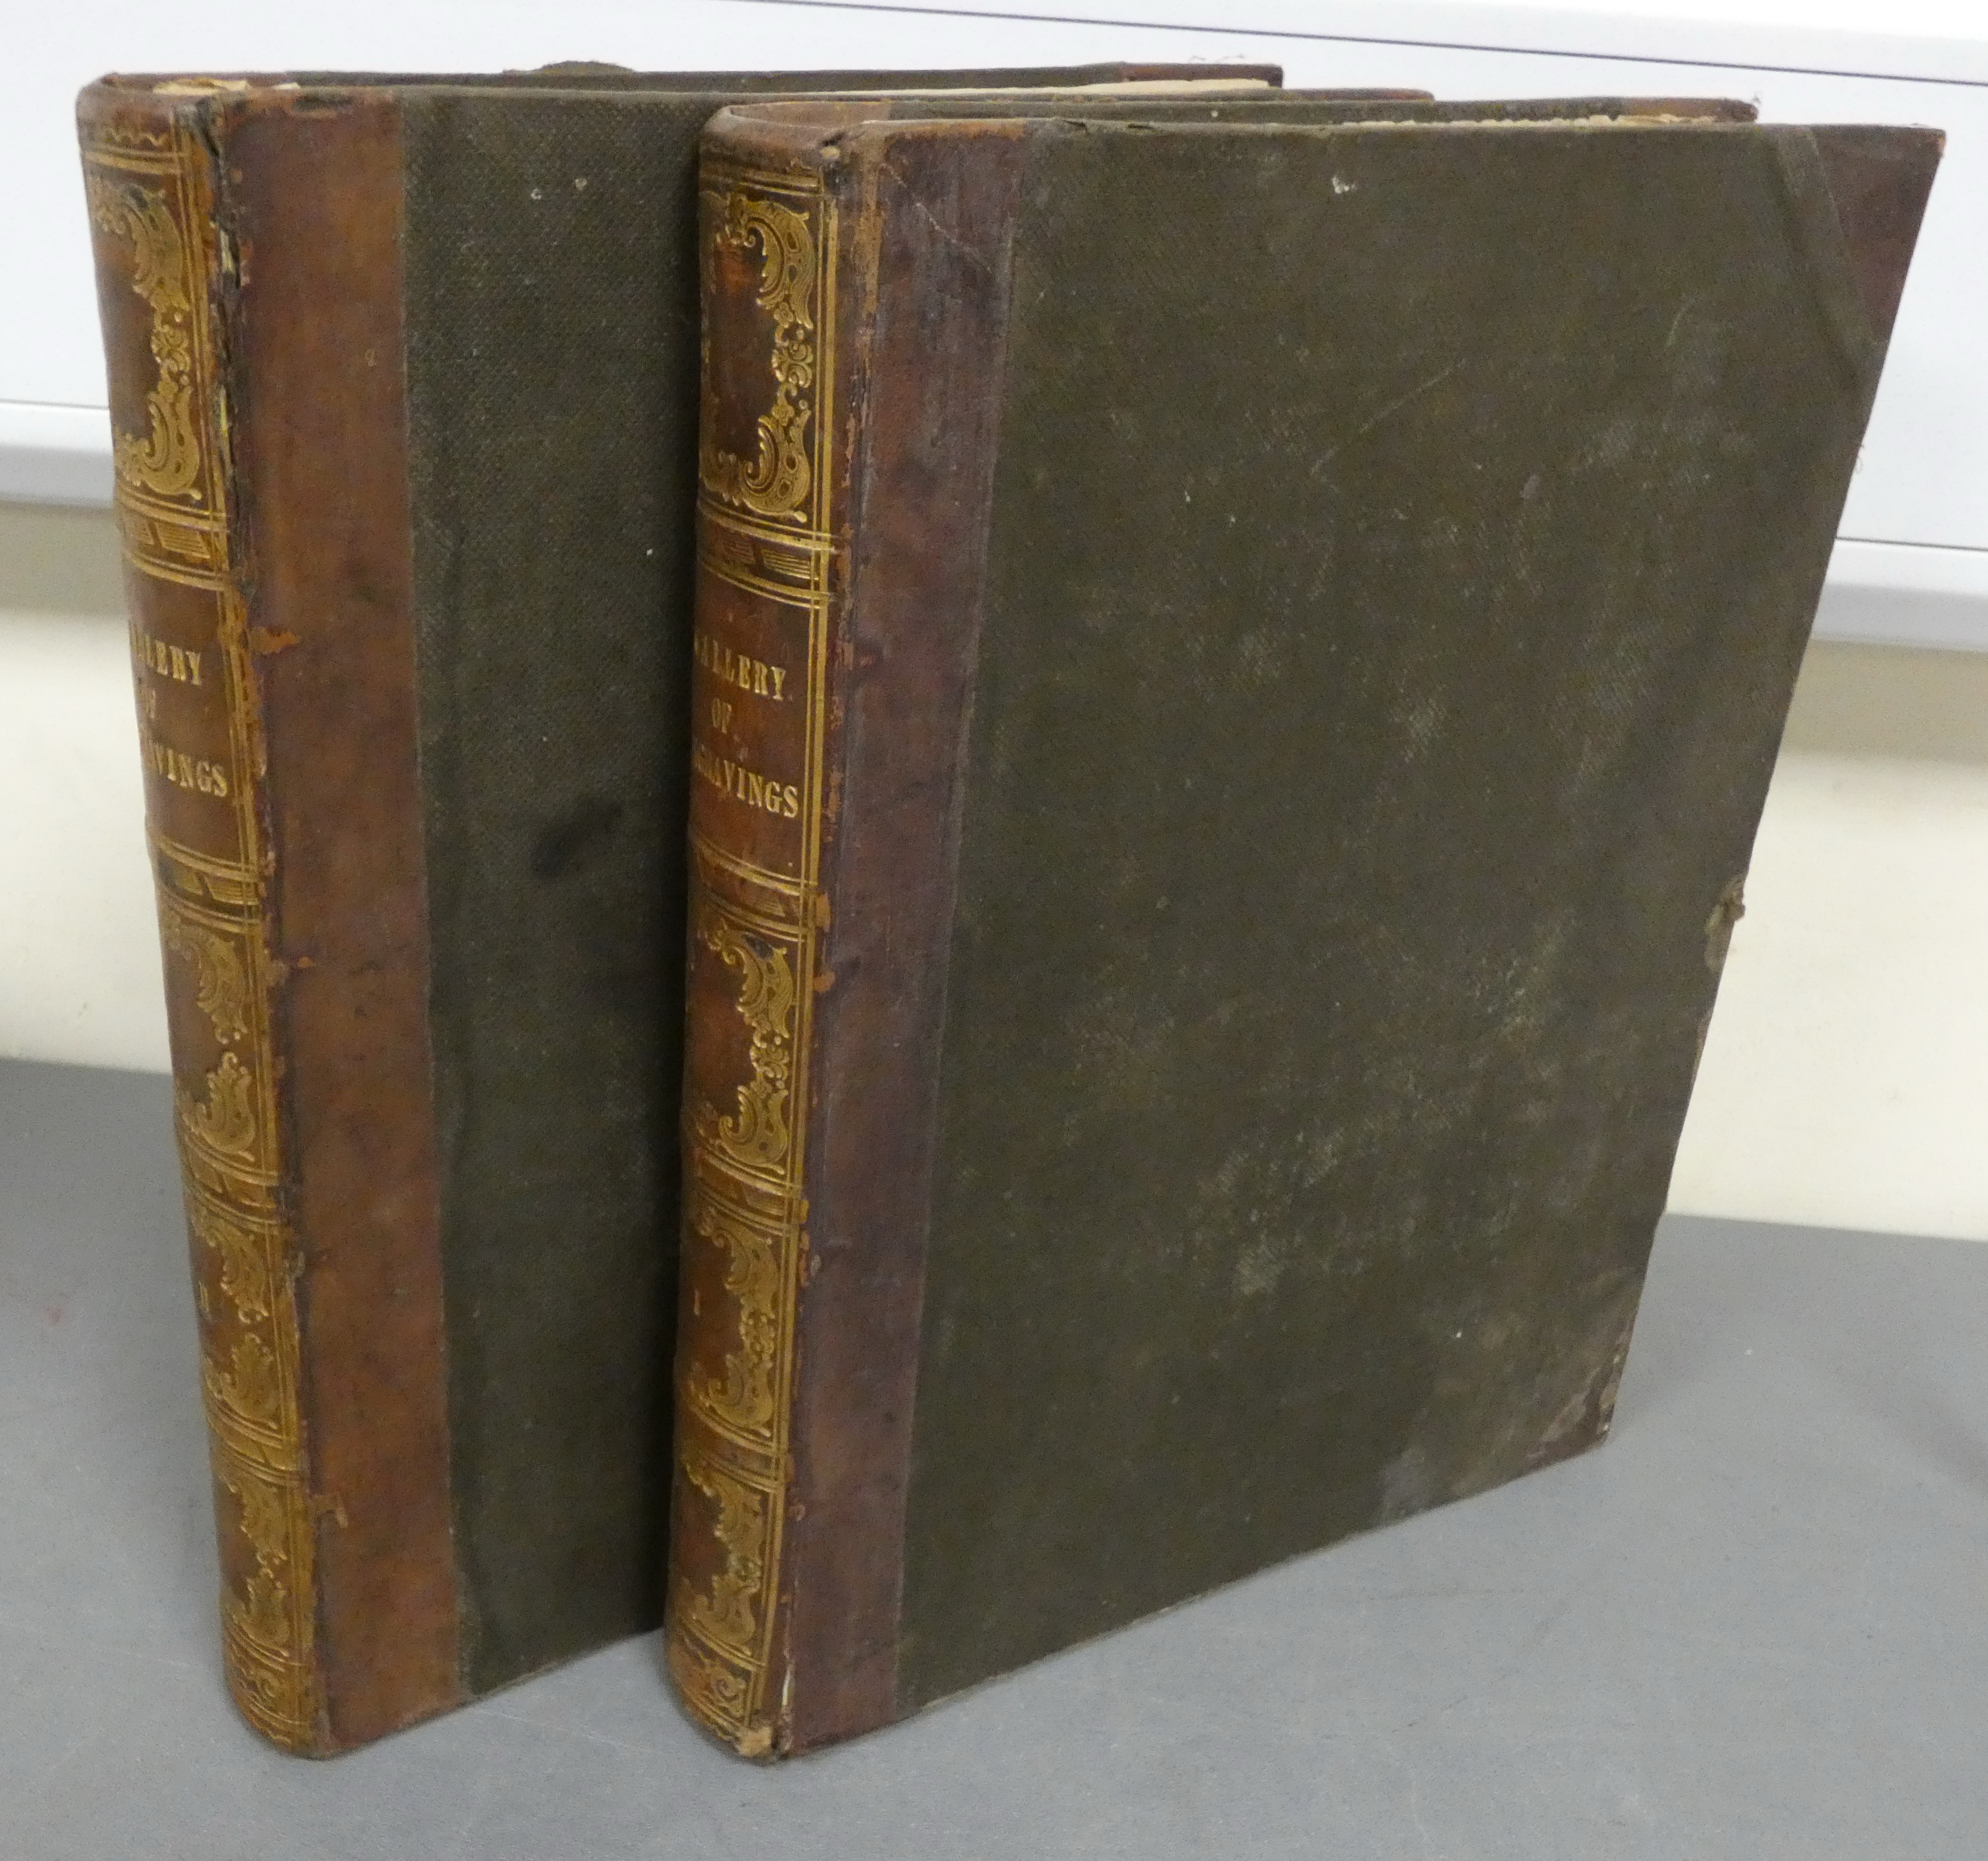 WRIGHT G. N.  The Gallery of Engravings. 2 vols. Many eng. plates, topography, works of art, etc.